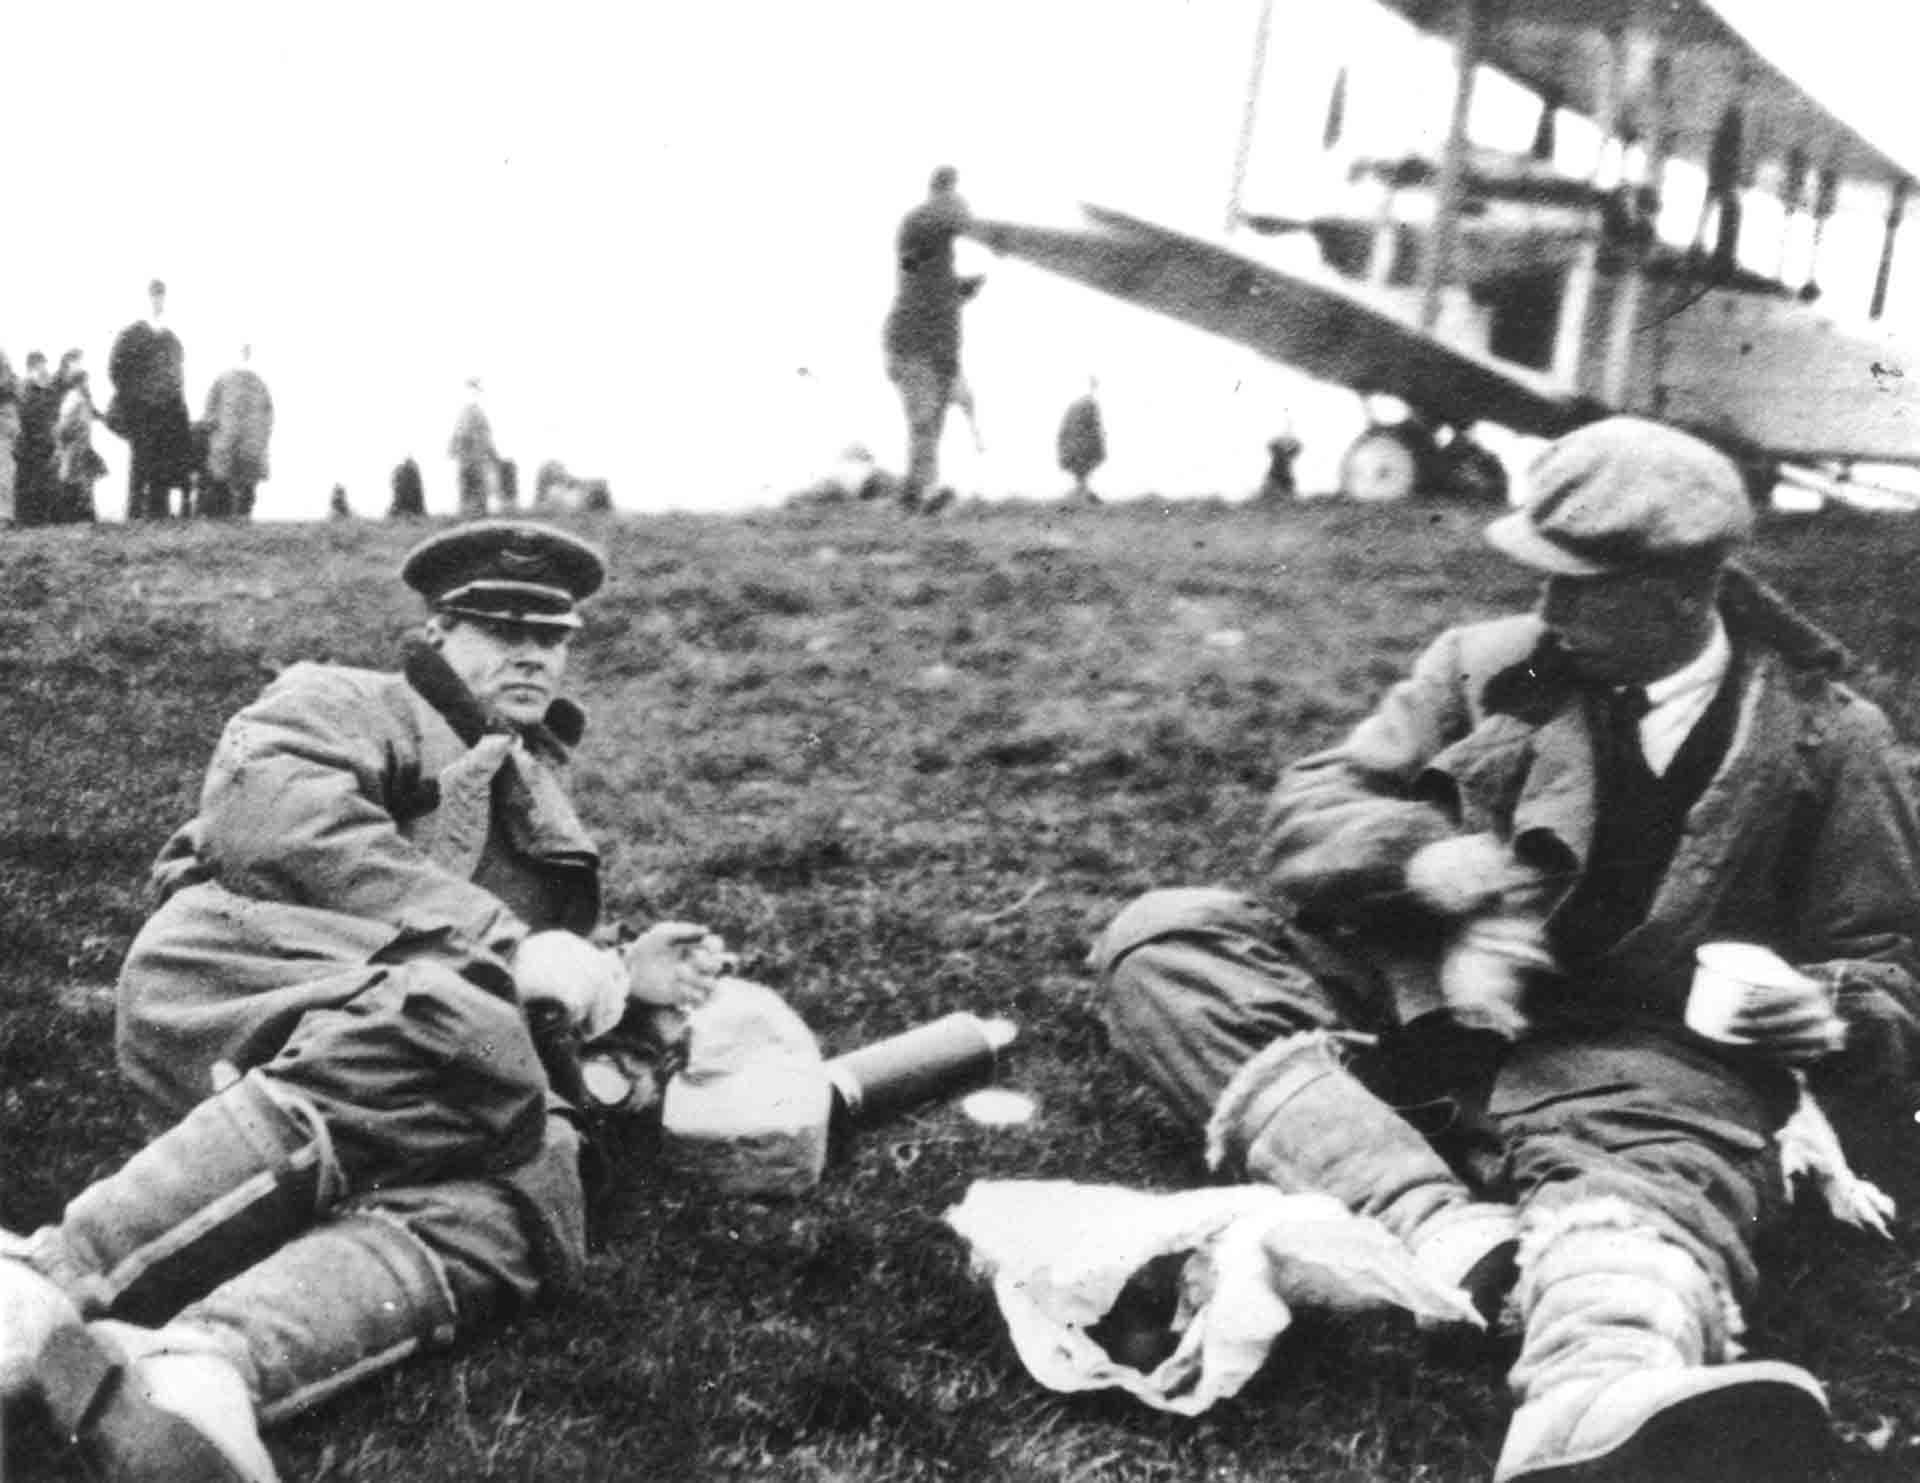 Alcock and Brown relaxing in field